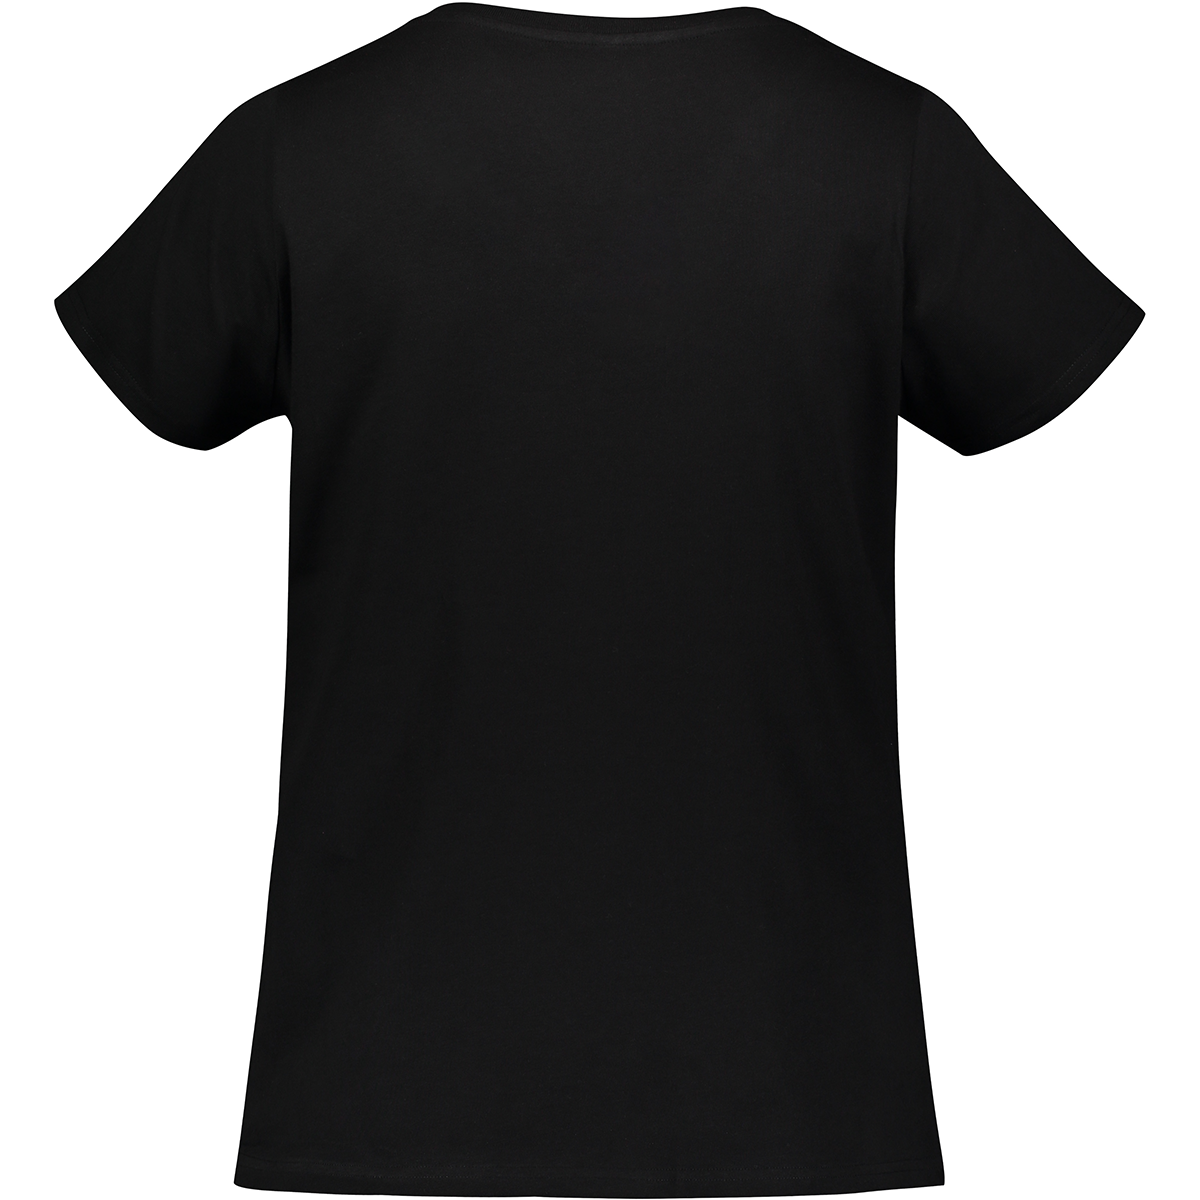 Inktastic Mardi Gras Let's Mardi Y'all with Jester Hat Women's Plus Size V-Neck T-Shirt - image 4 of 4